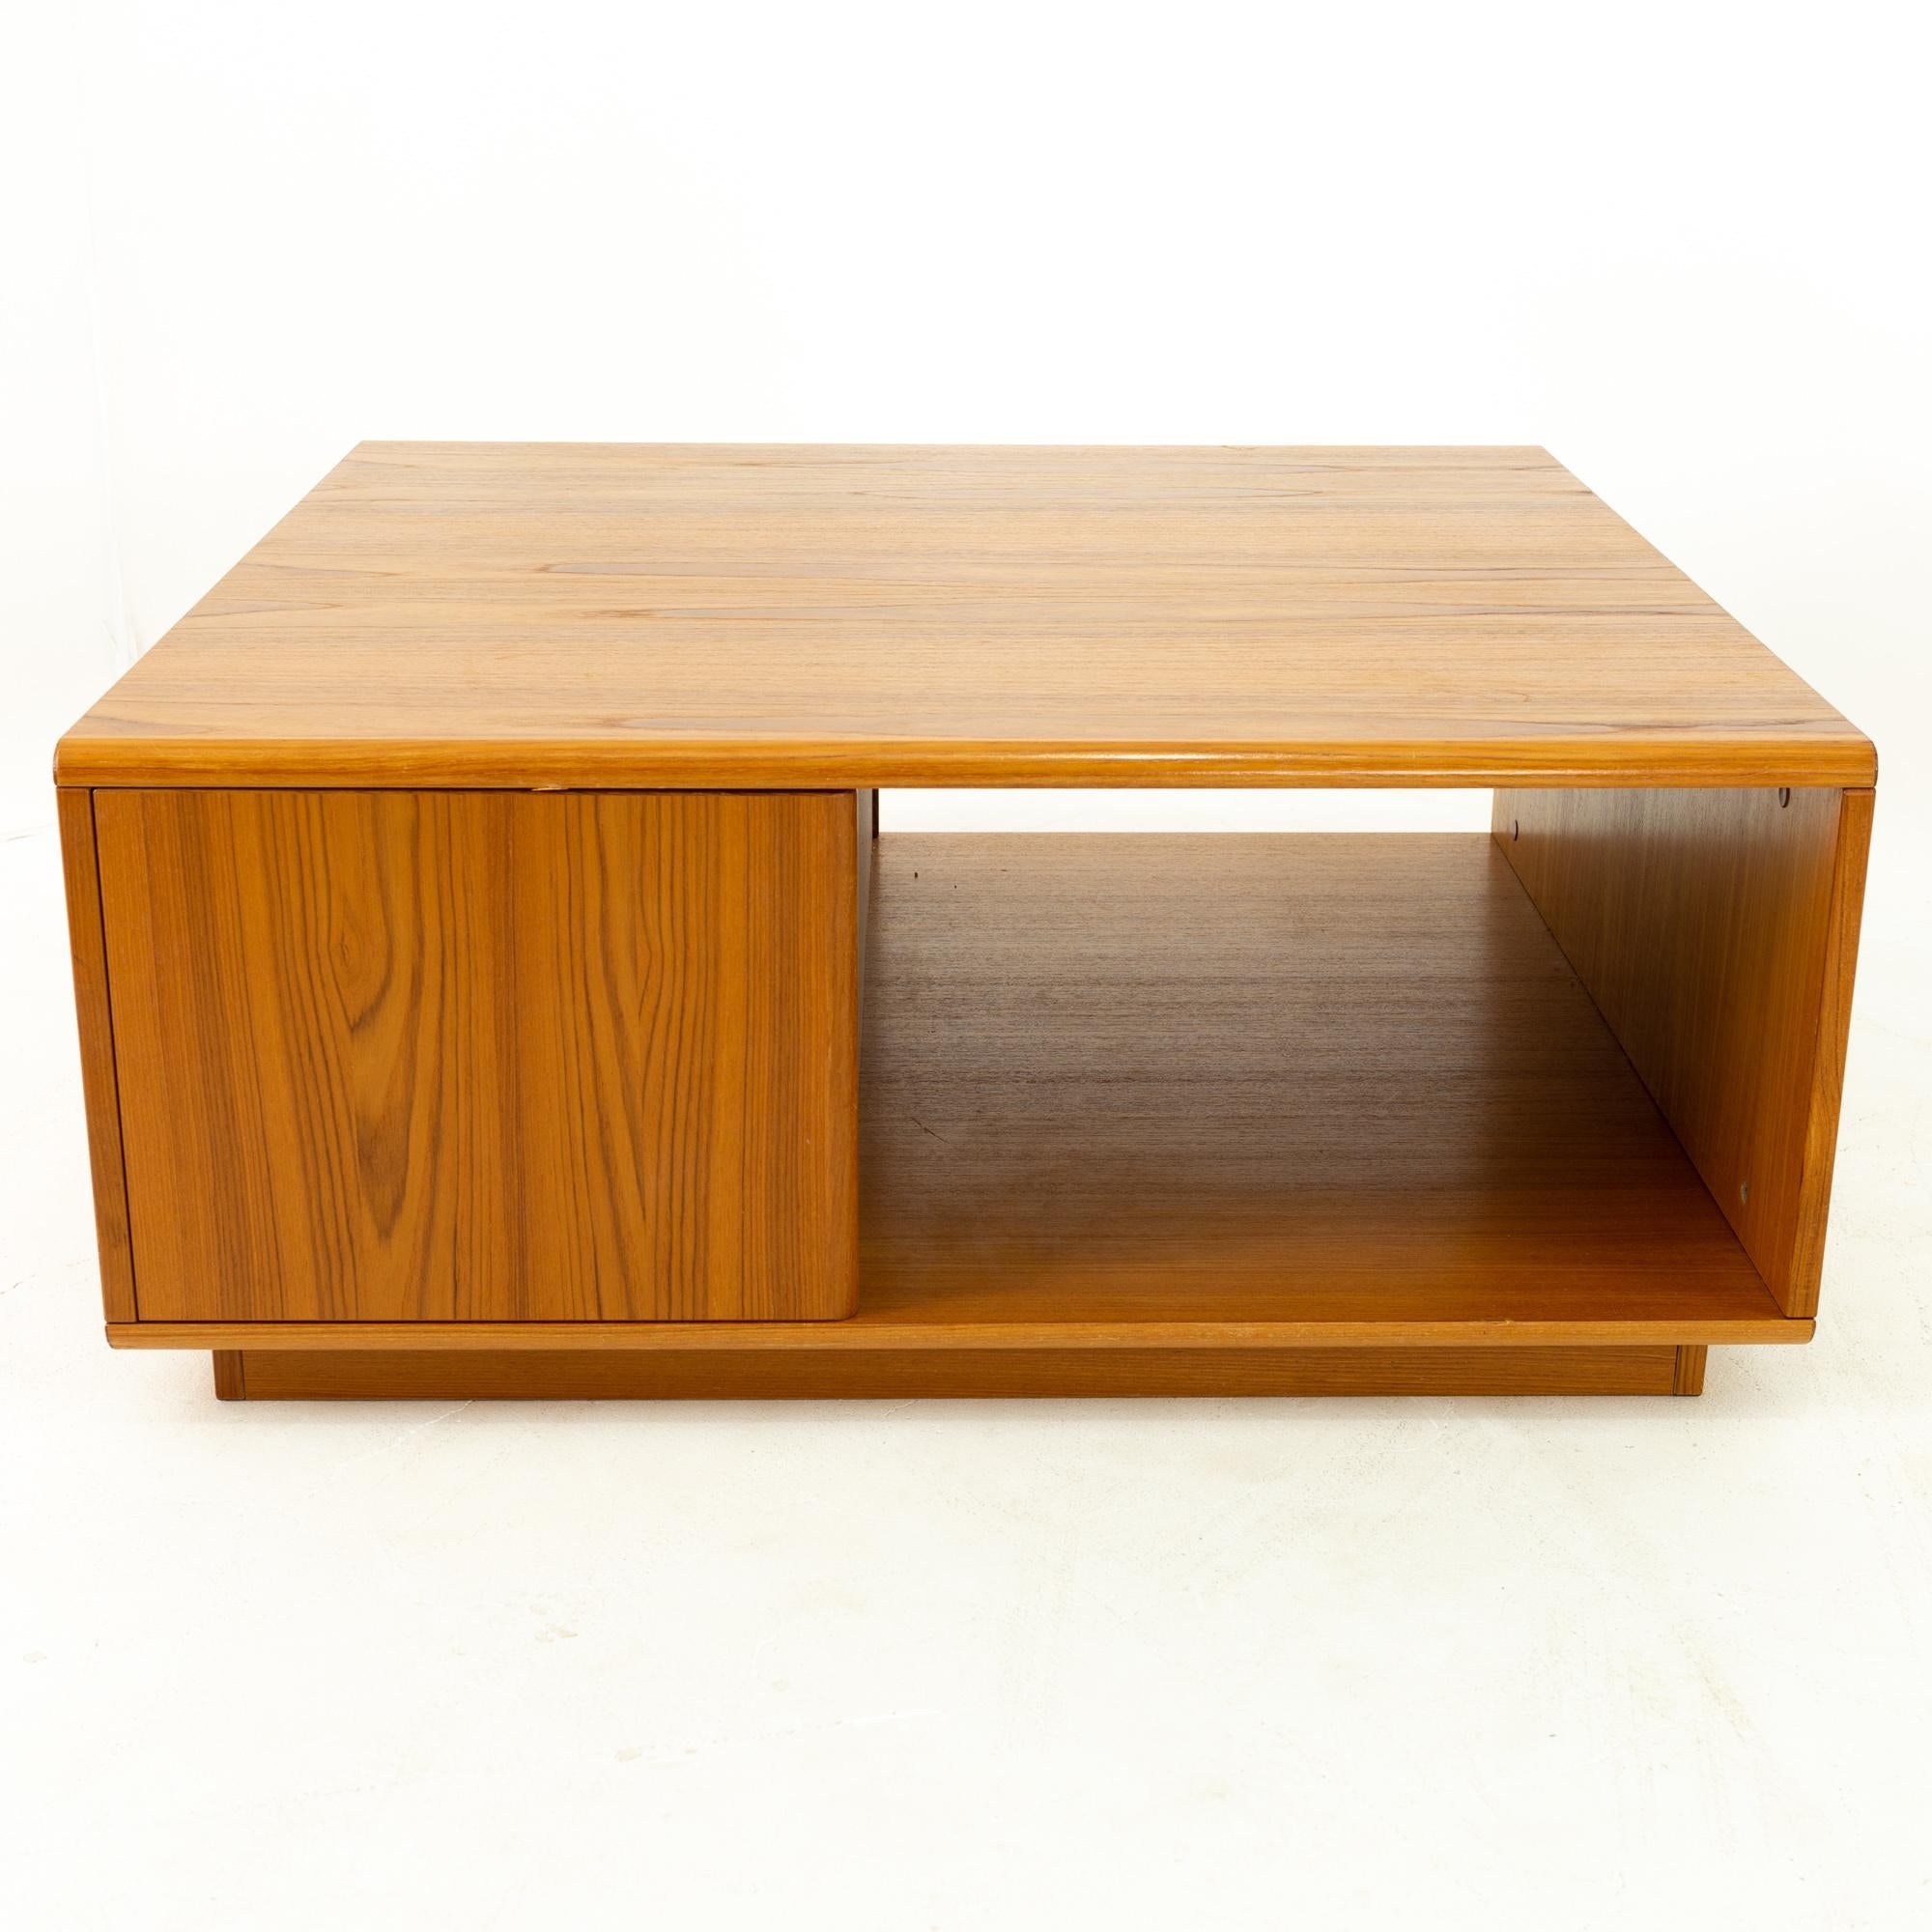 Jesper International midcentury Danish teak large storage coffee table 

Measures: 39 wide x 39 deep x 16.5 high

This price includes getting this piece in what we call restored vintage condition. That means the piece is permanently fixed upon